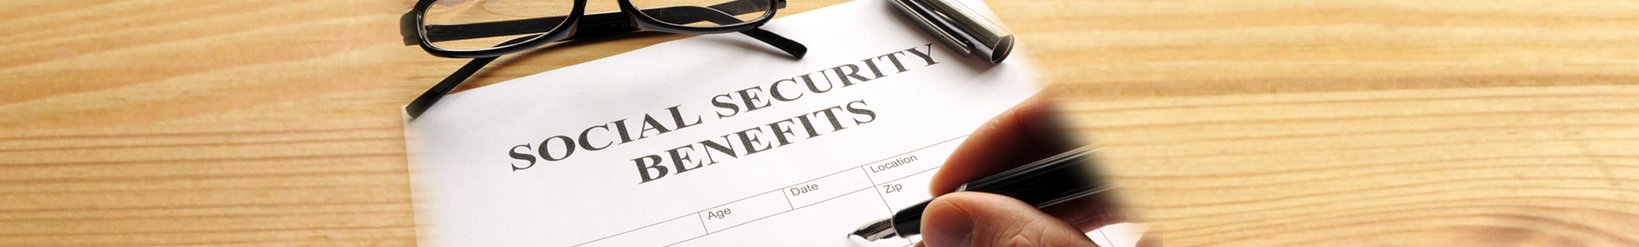 Social Security Disability Benefits for Lupus (Page 1)